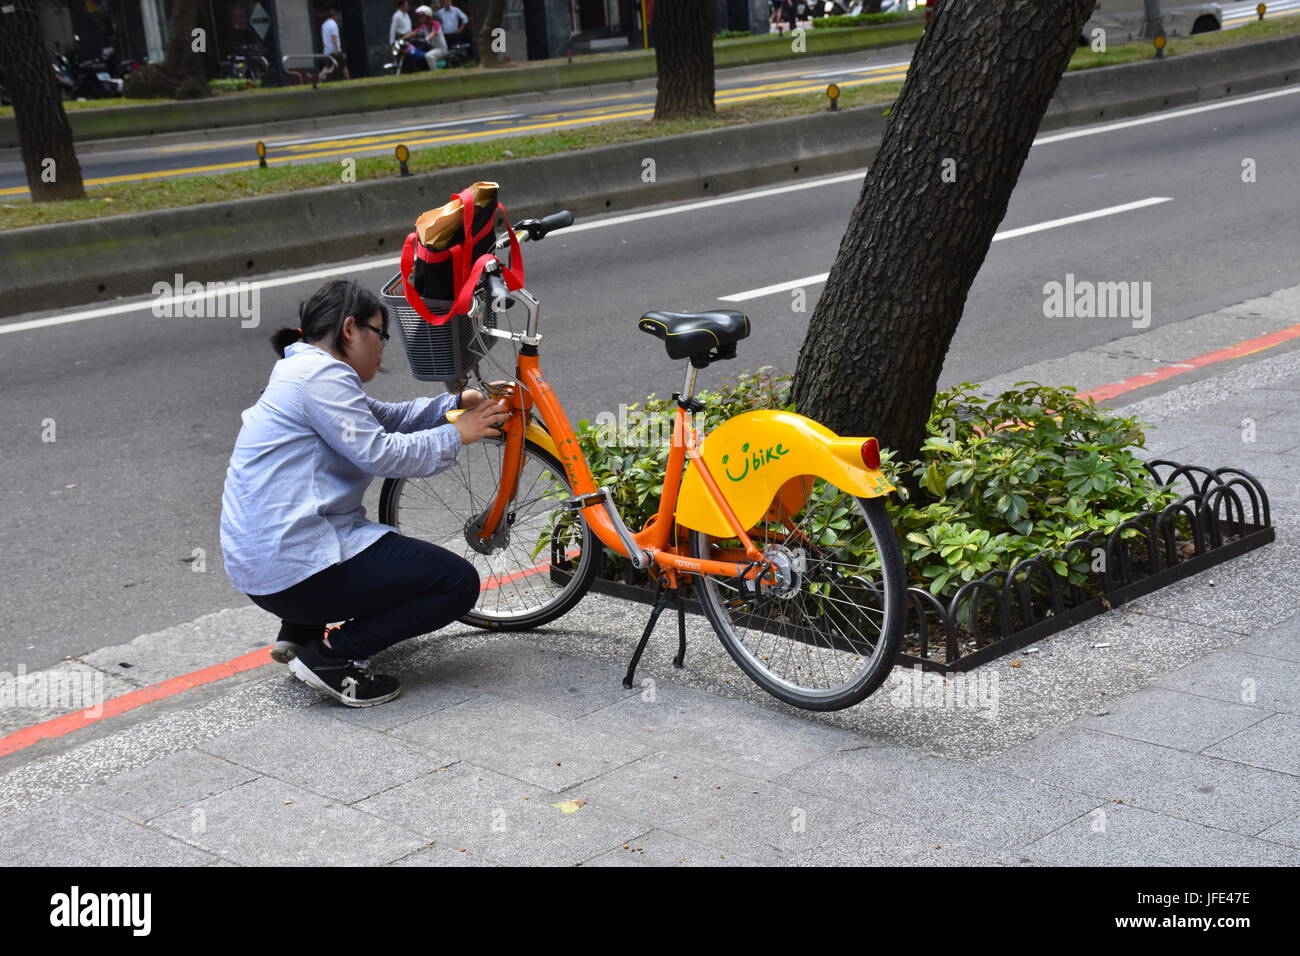 High school student trying to fix the public U bike so she can continue on her way, Taipei, Taiwan. Stock Photo